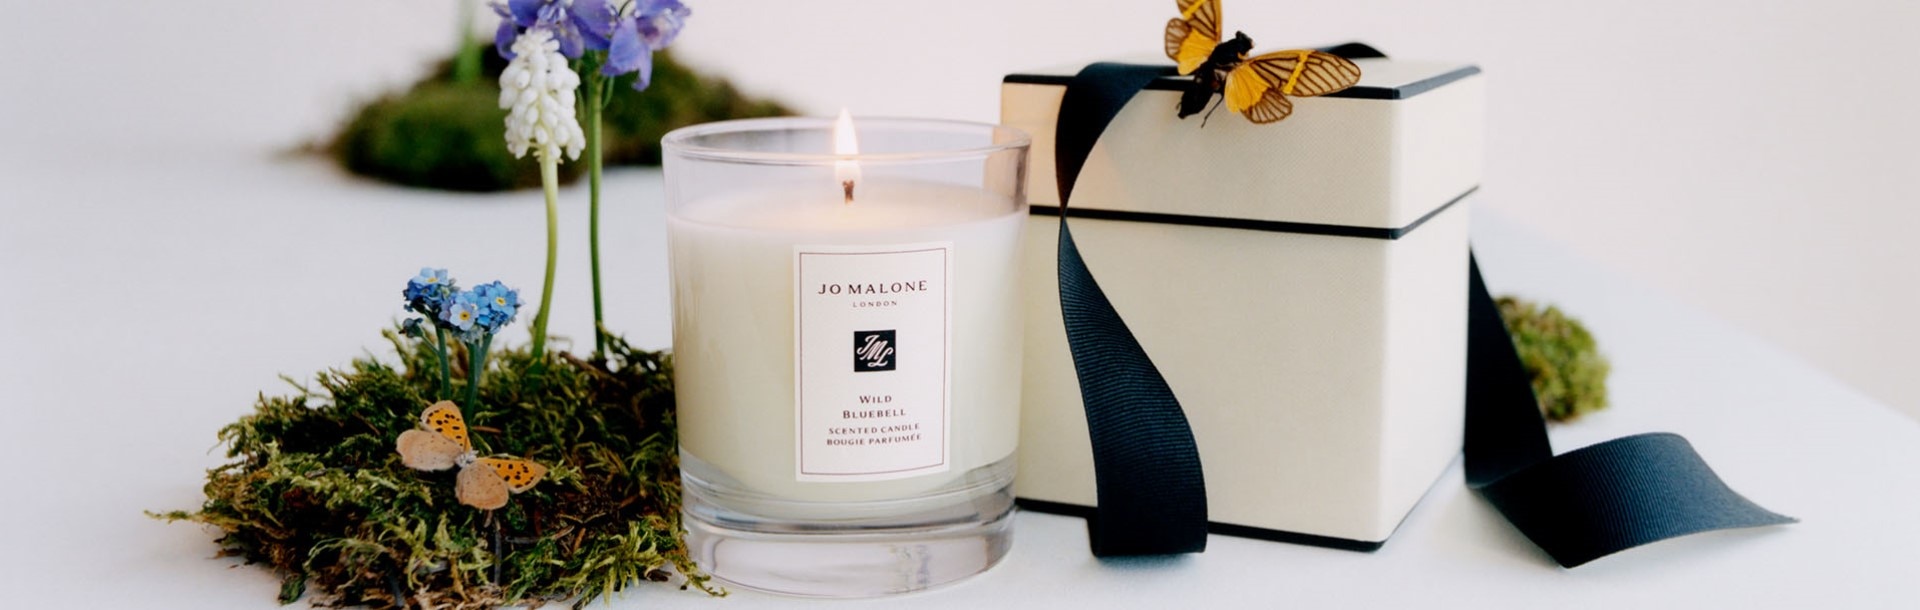 Image of a Jo Malone London Home Candle with butterflies and miniature plants